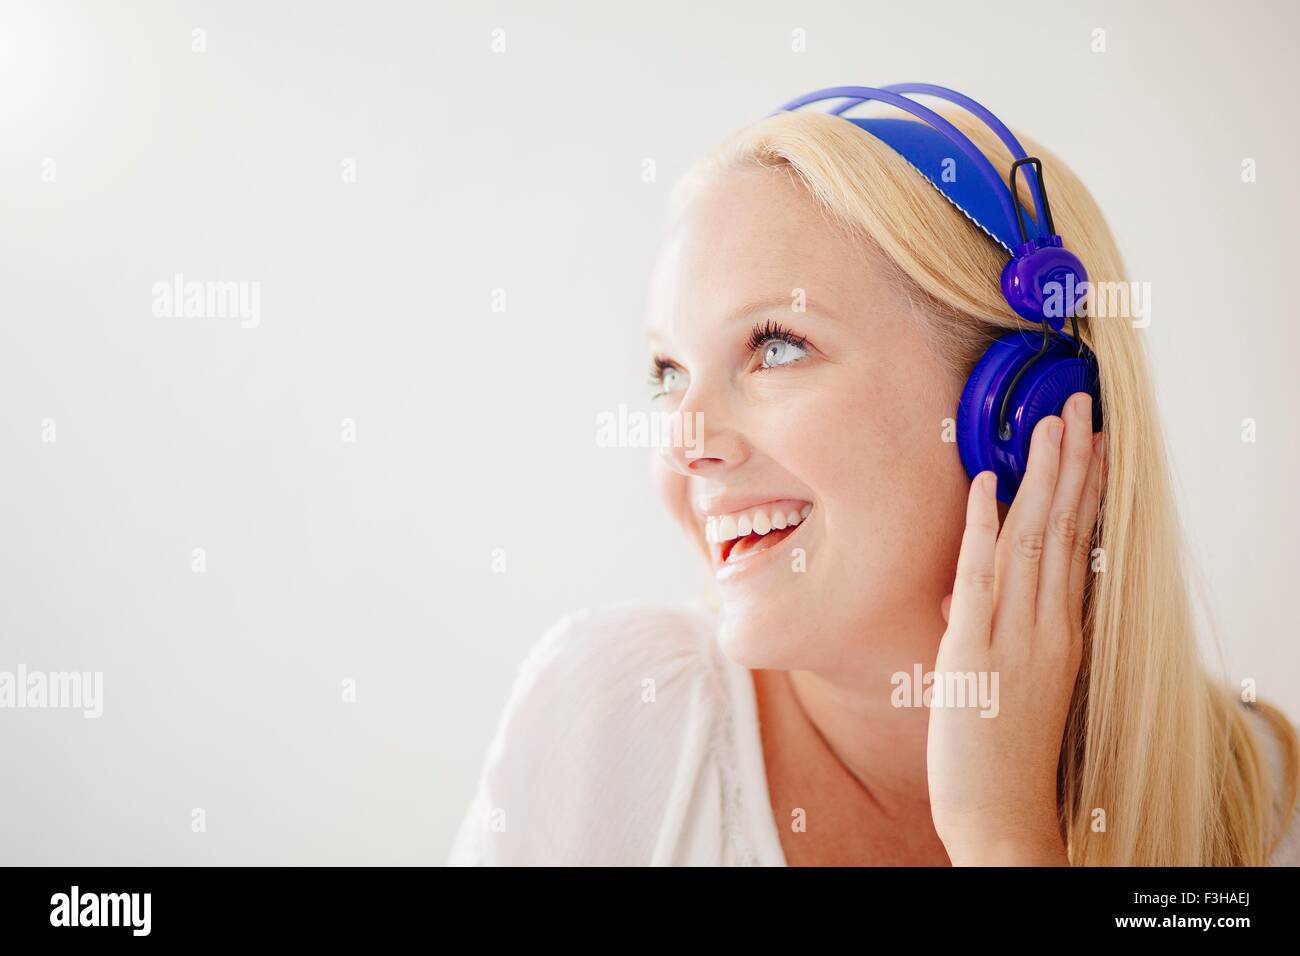 Young woman with long blonde hair wearing headphones looking away smiling Stock Photo